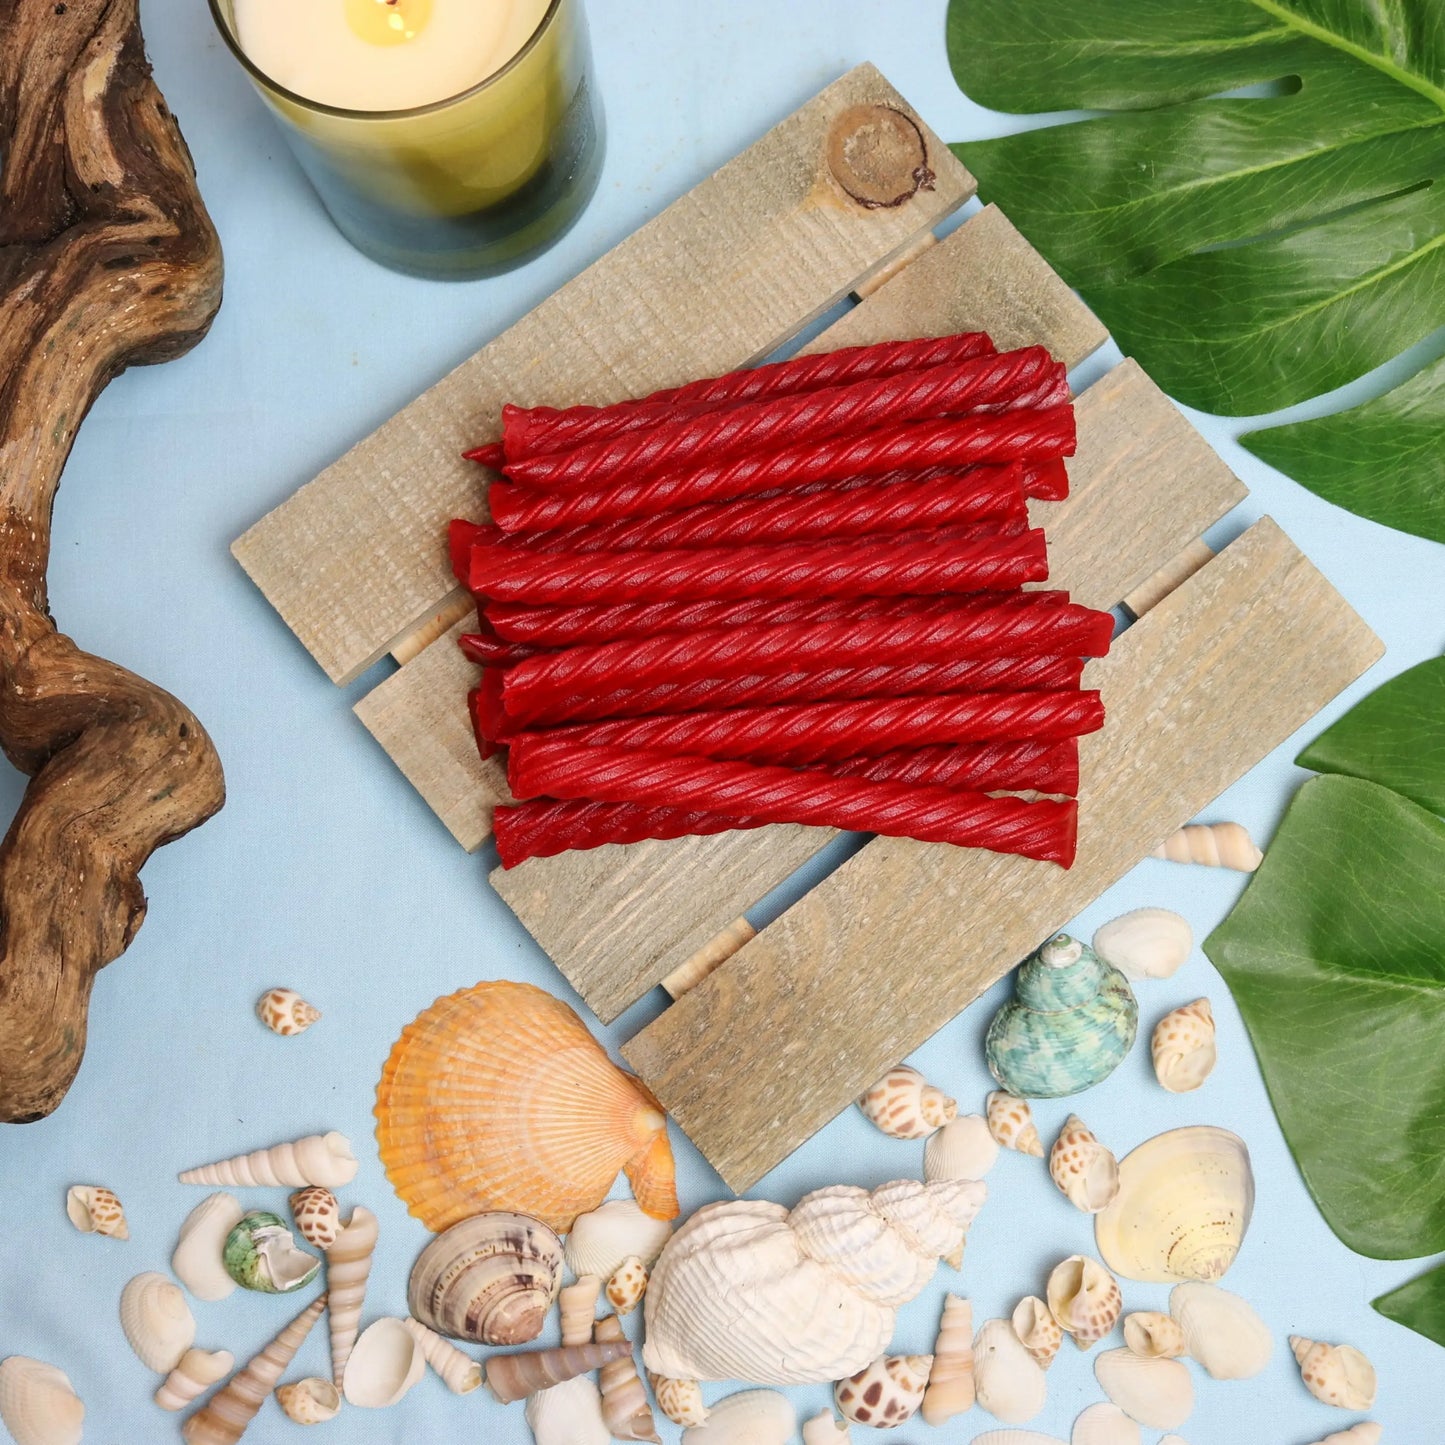 Red Vines Original Red Jumbo Twists in a summer scene with seashells and beach wood